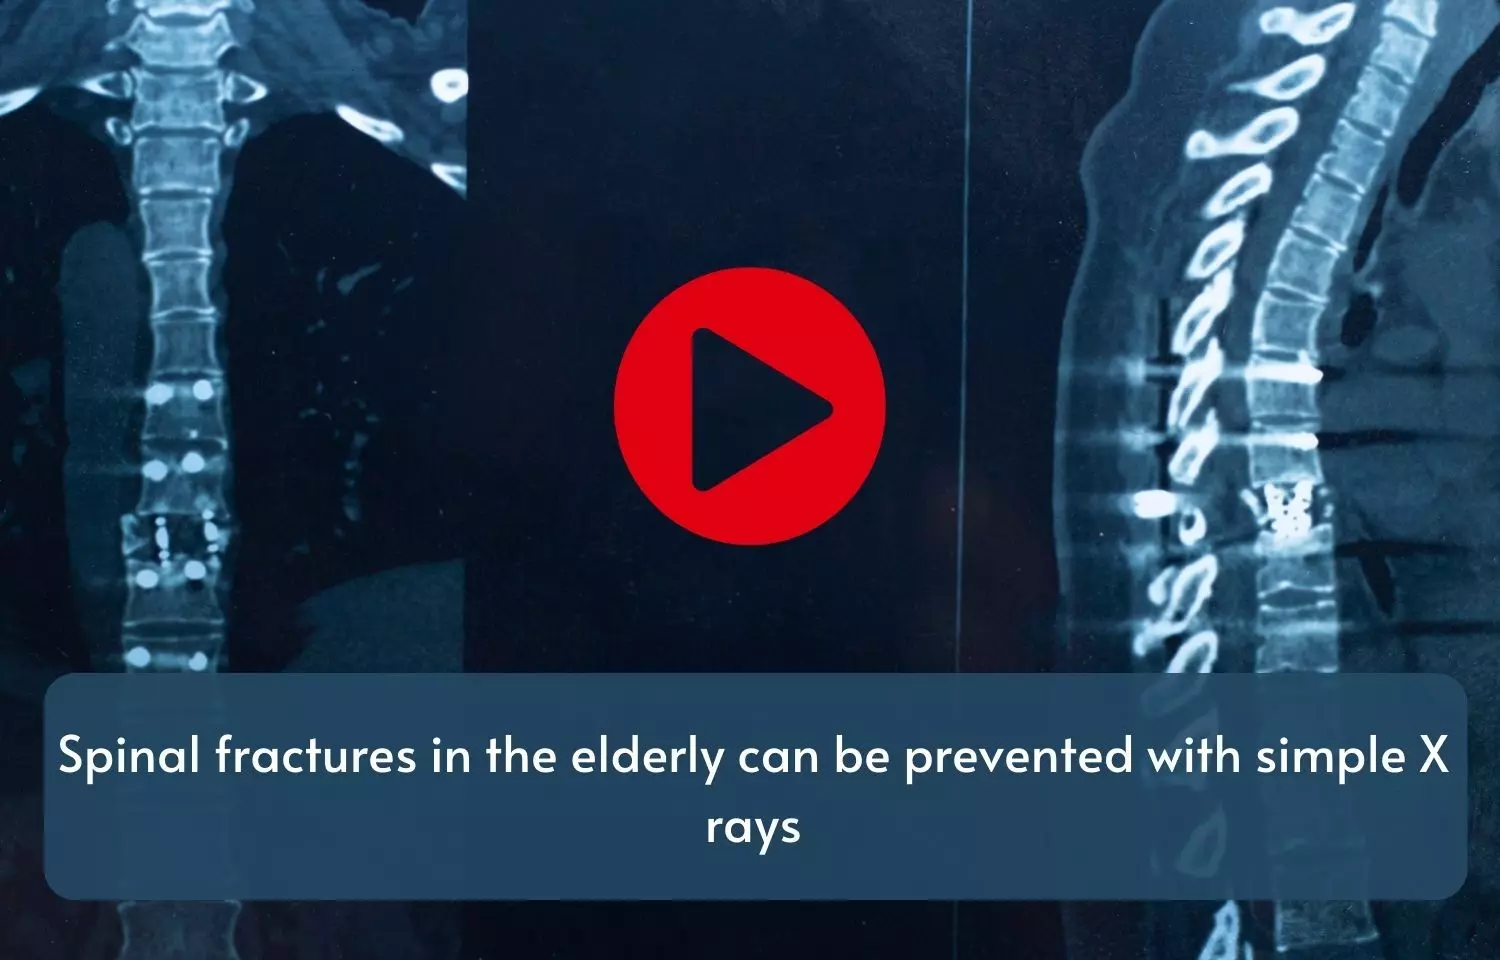 Spinal fractures in the elderly can be prevented with simple X-rays